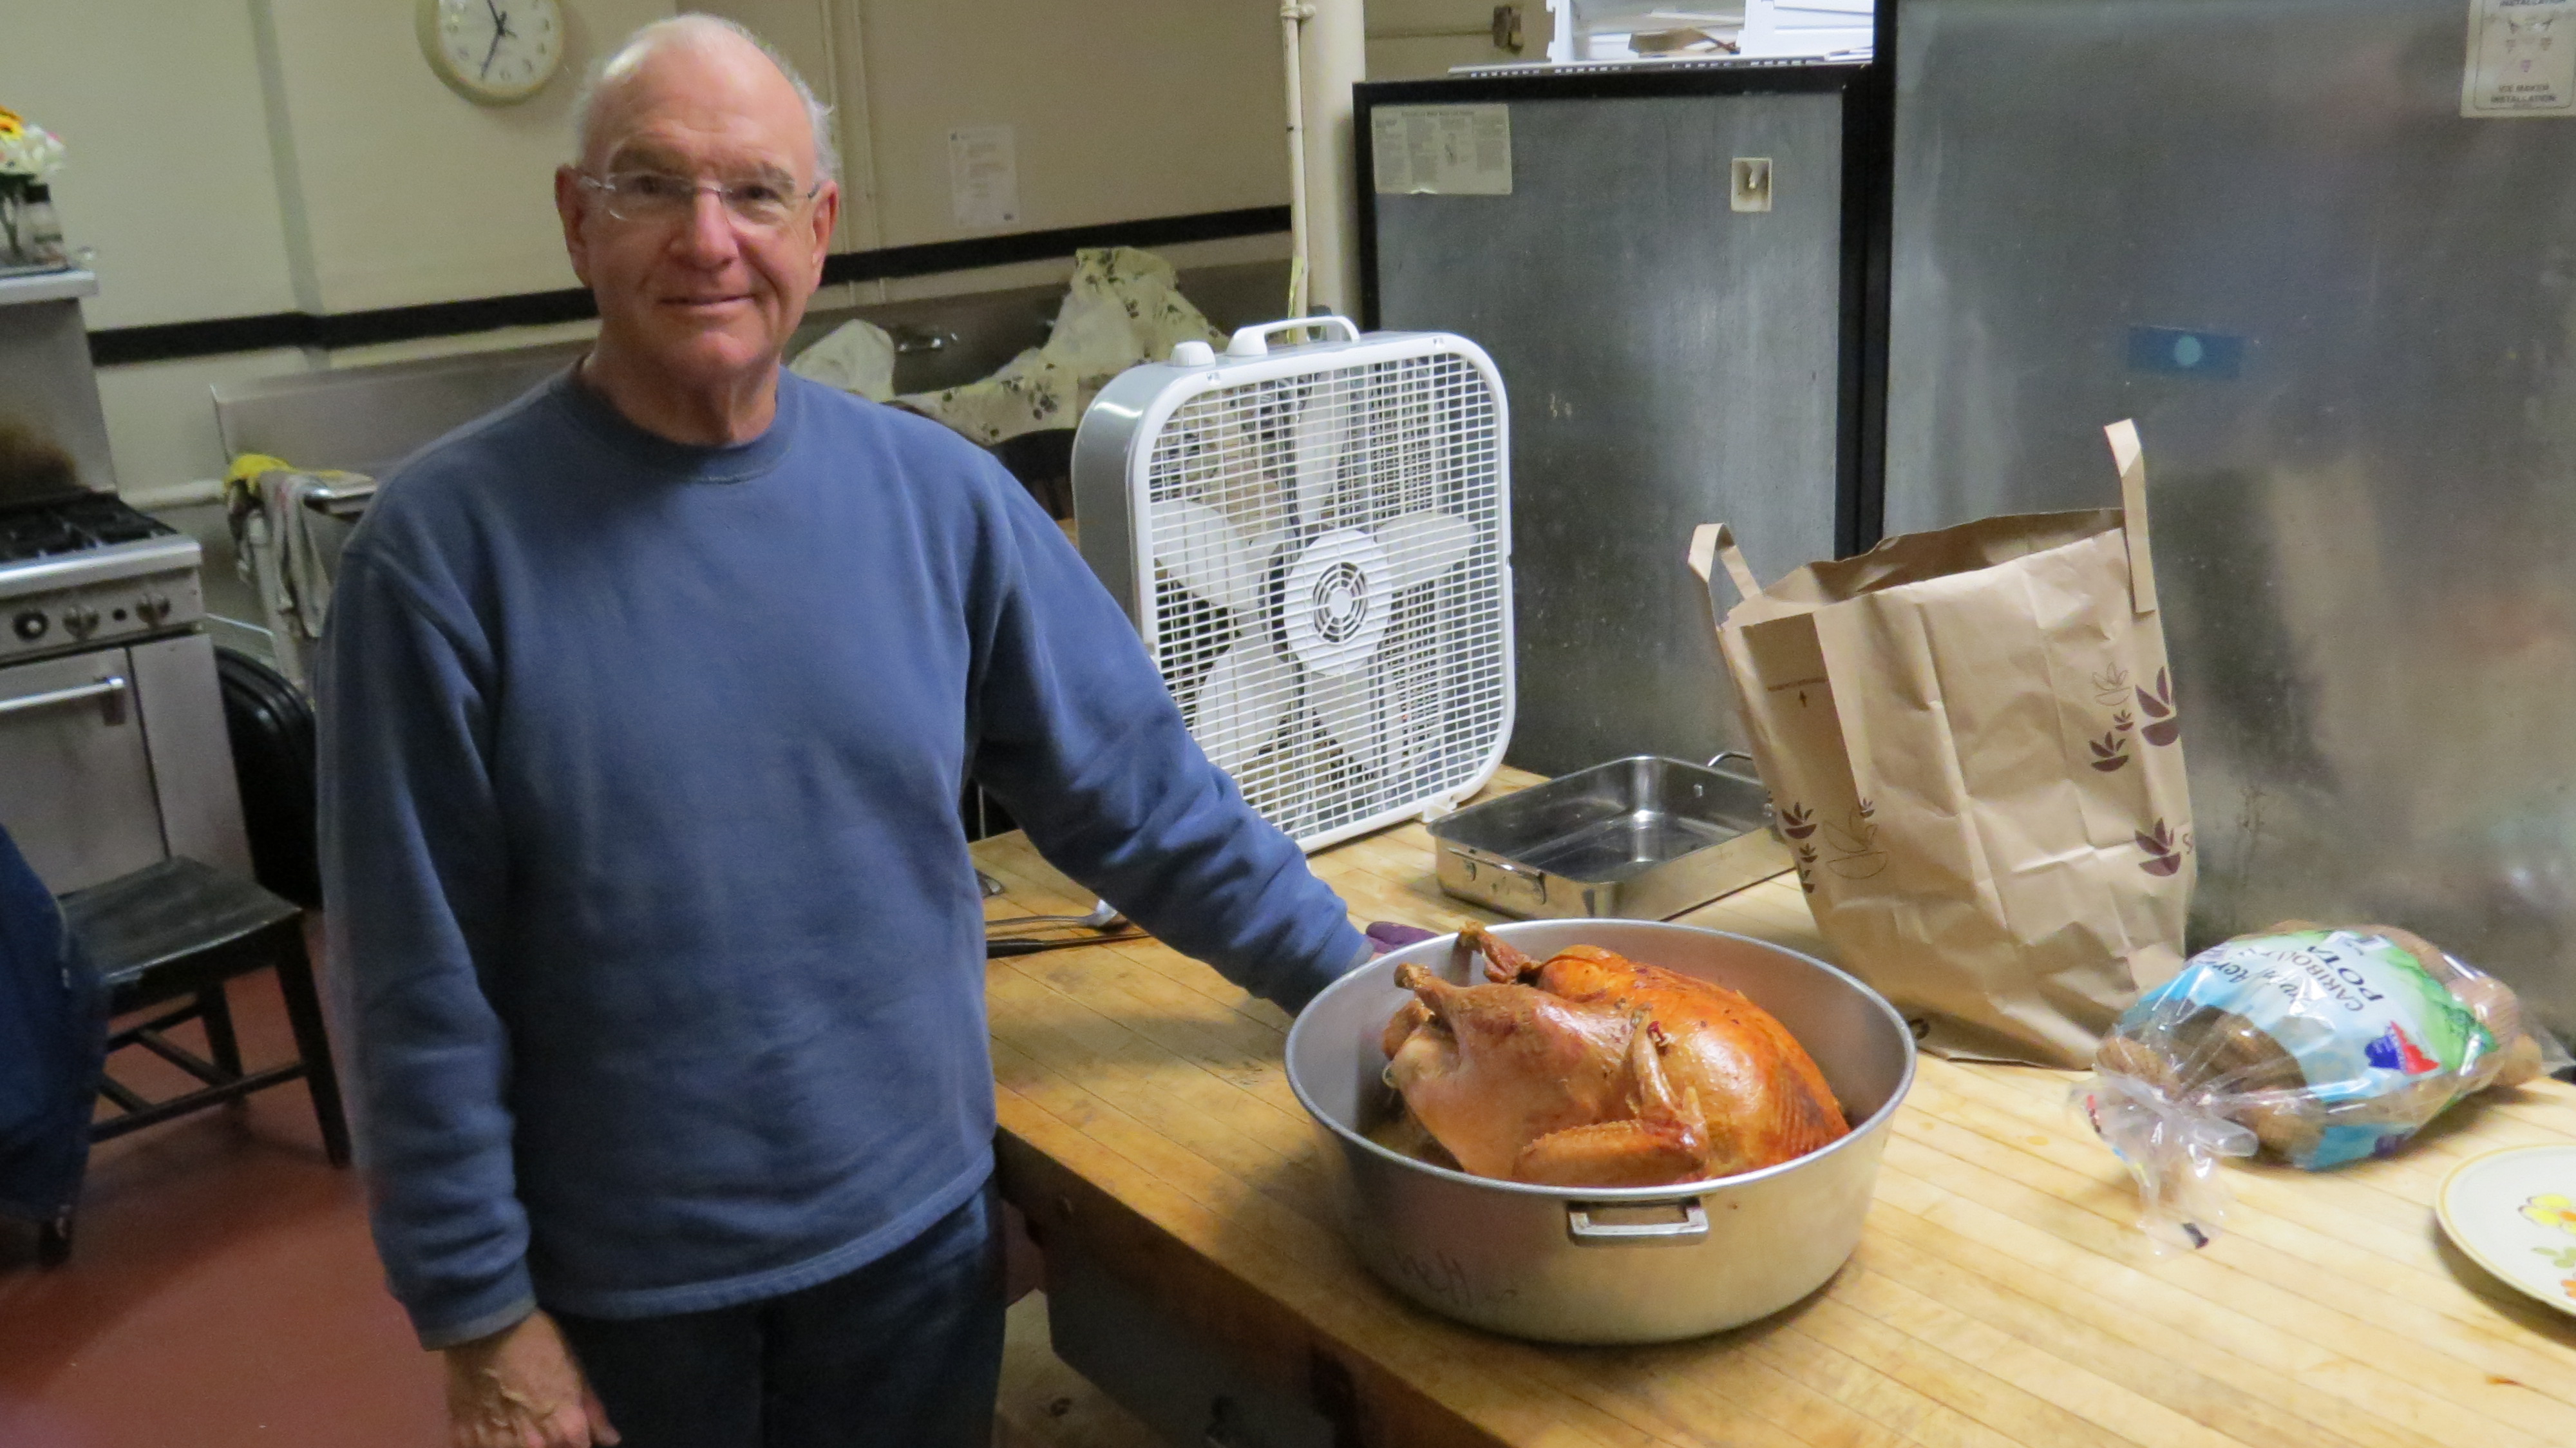 Chuck Bennett with the turkey he cooked for Thanksgiving